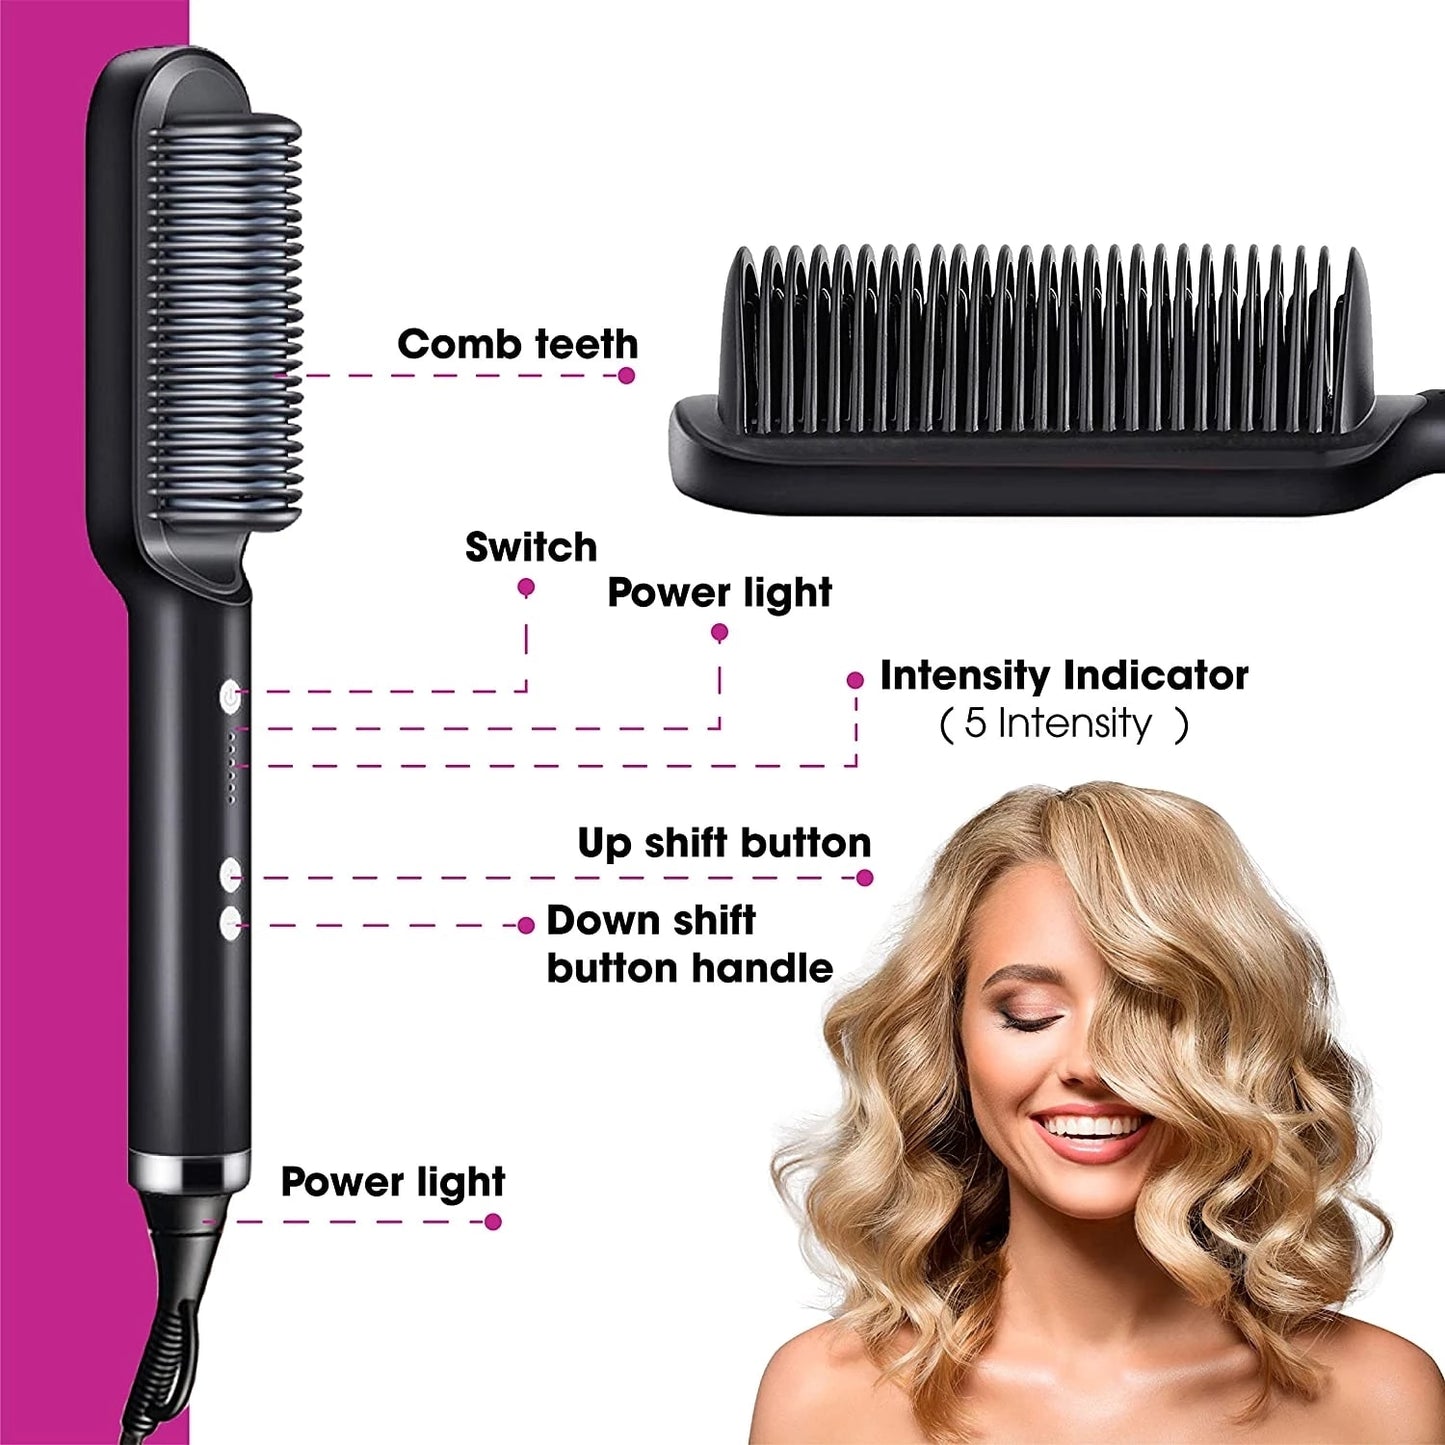 5 in 1 Smooth Brush, Dry, Moisturize, Shaper and Anti-Frizz